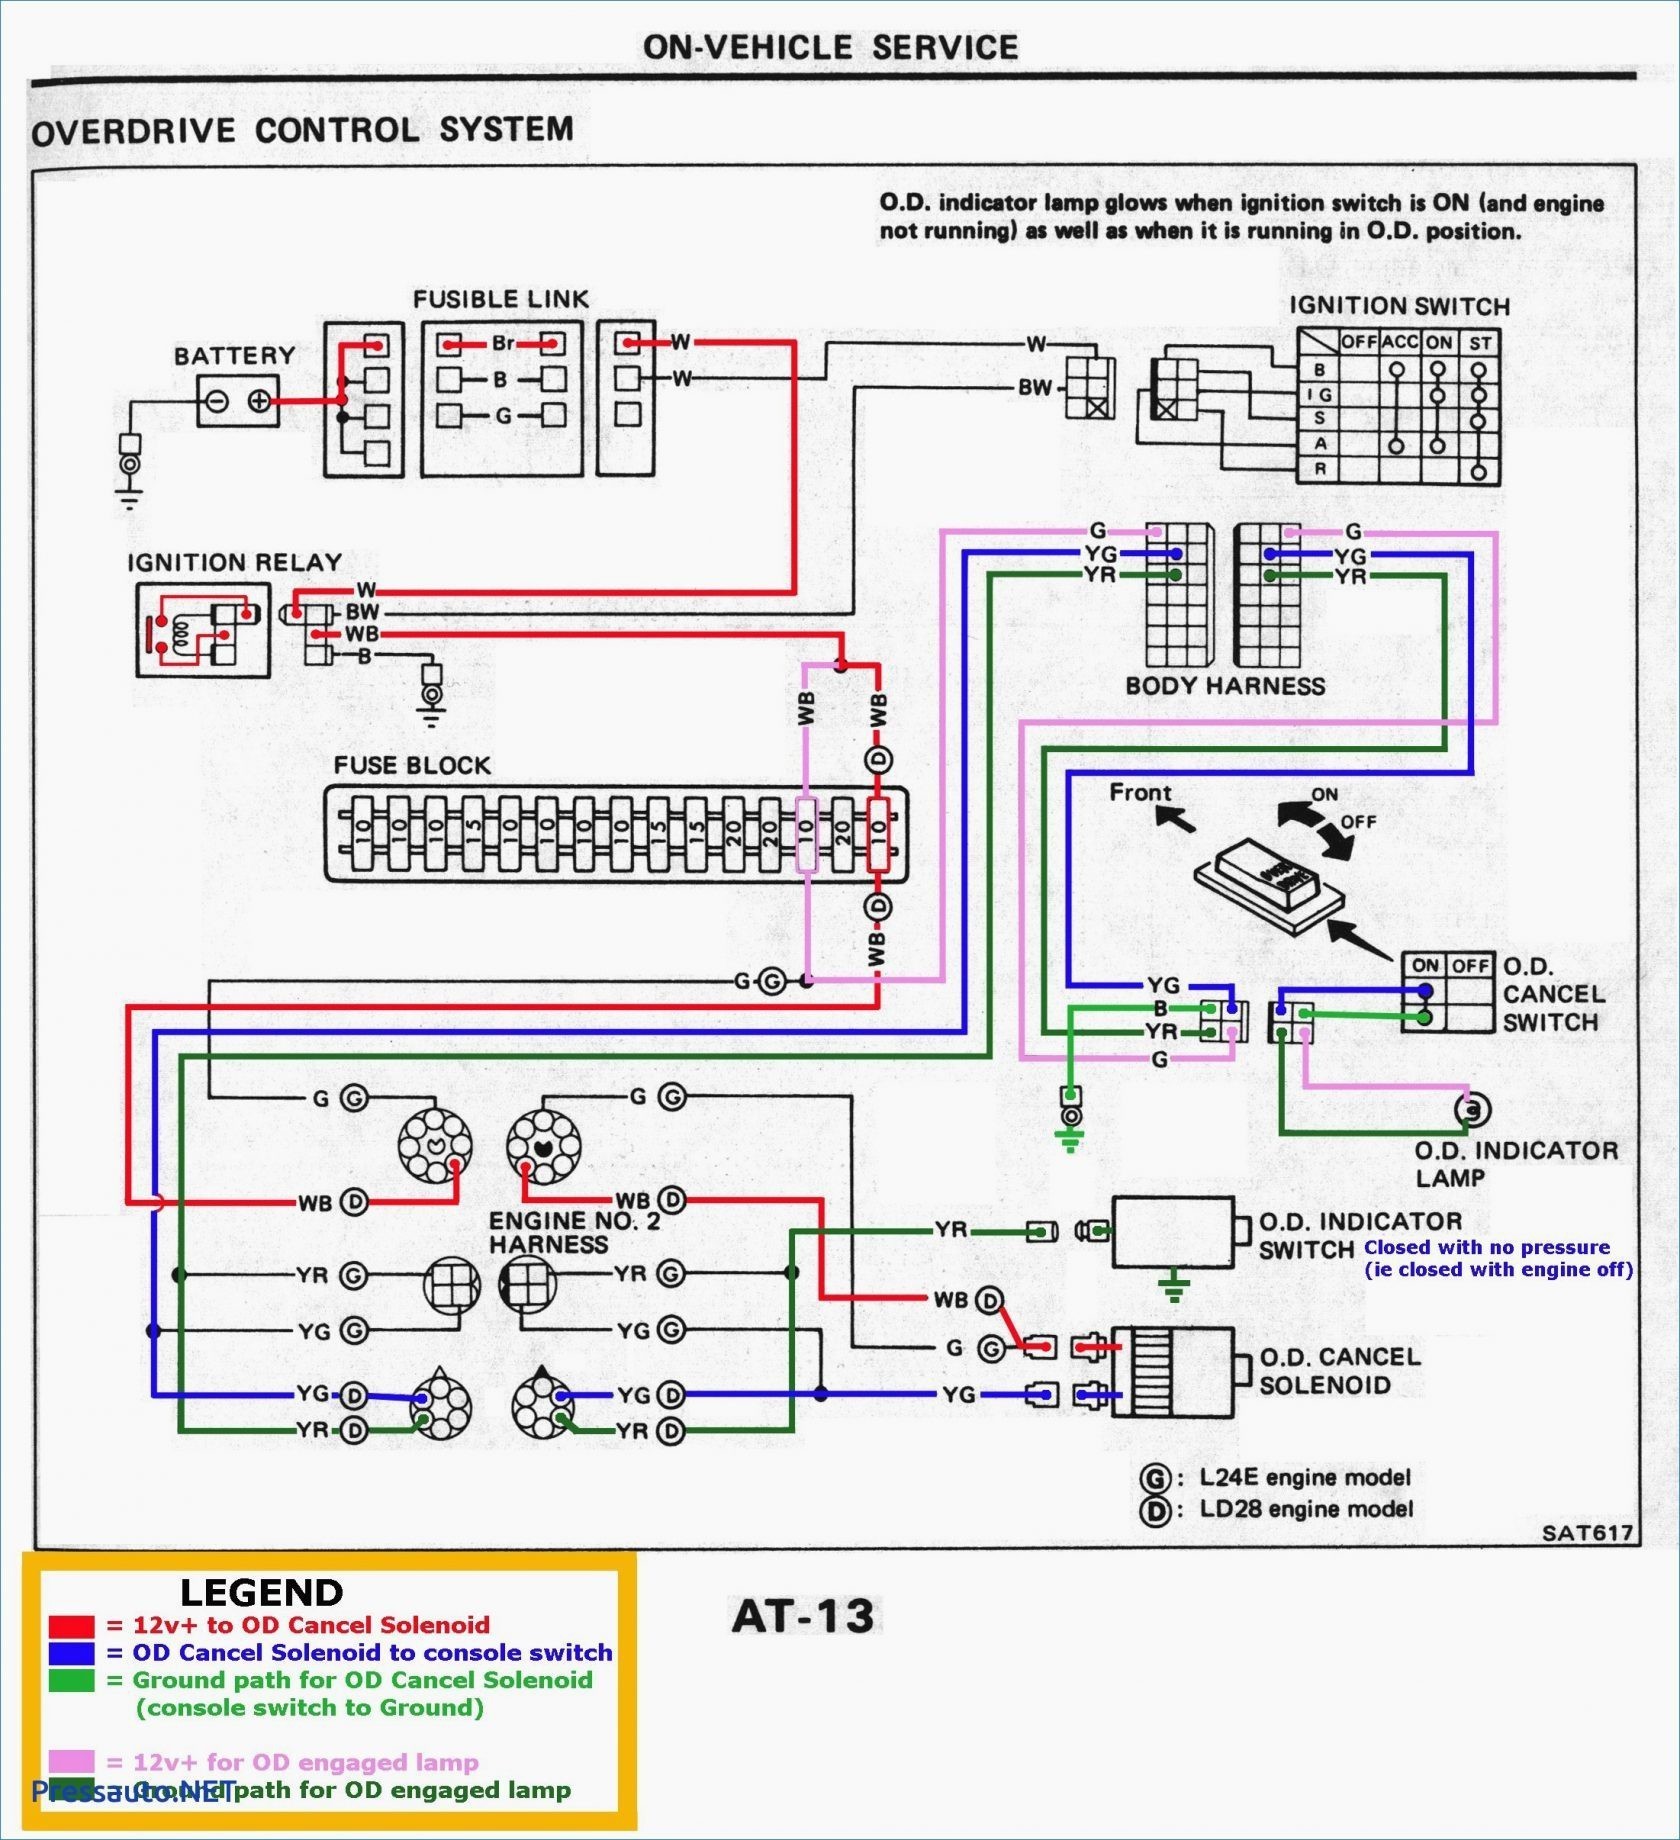 Wiring Diagram for Turn Signal Flasher Neon Wiring Diagram Of Wiring Diagram for Turn Signal Flasher